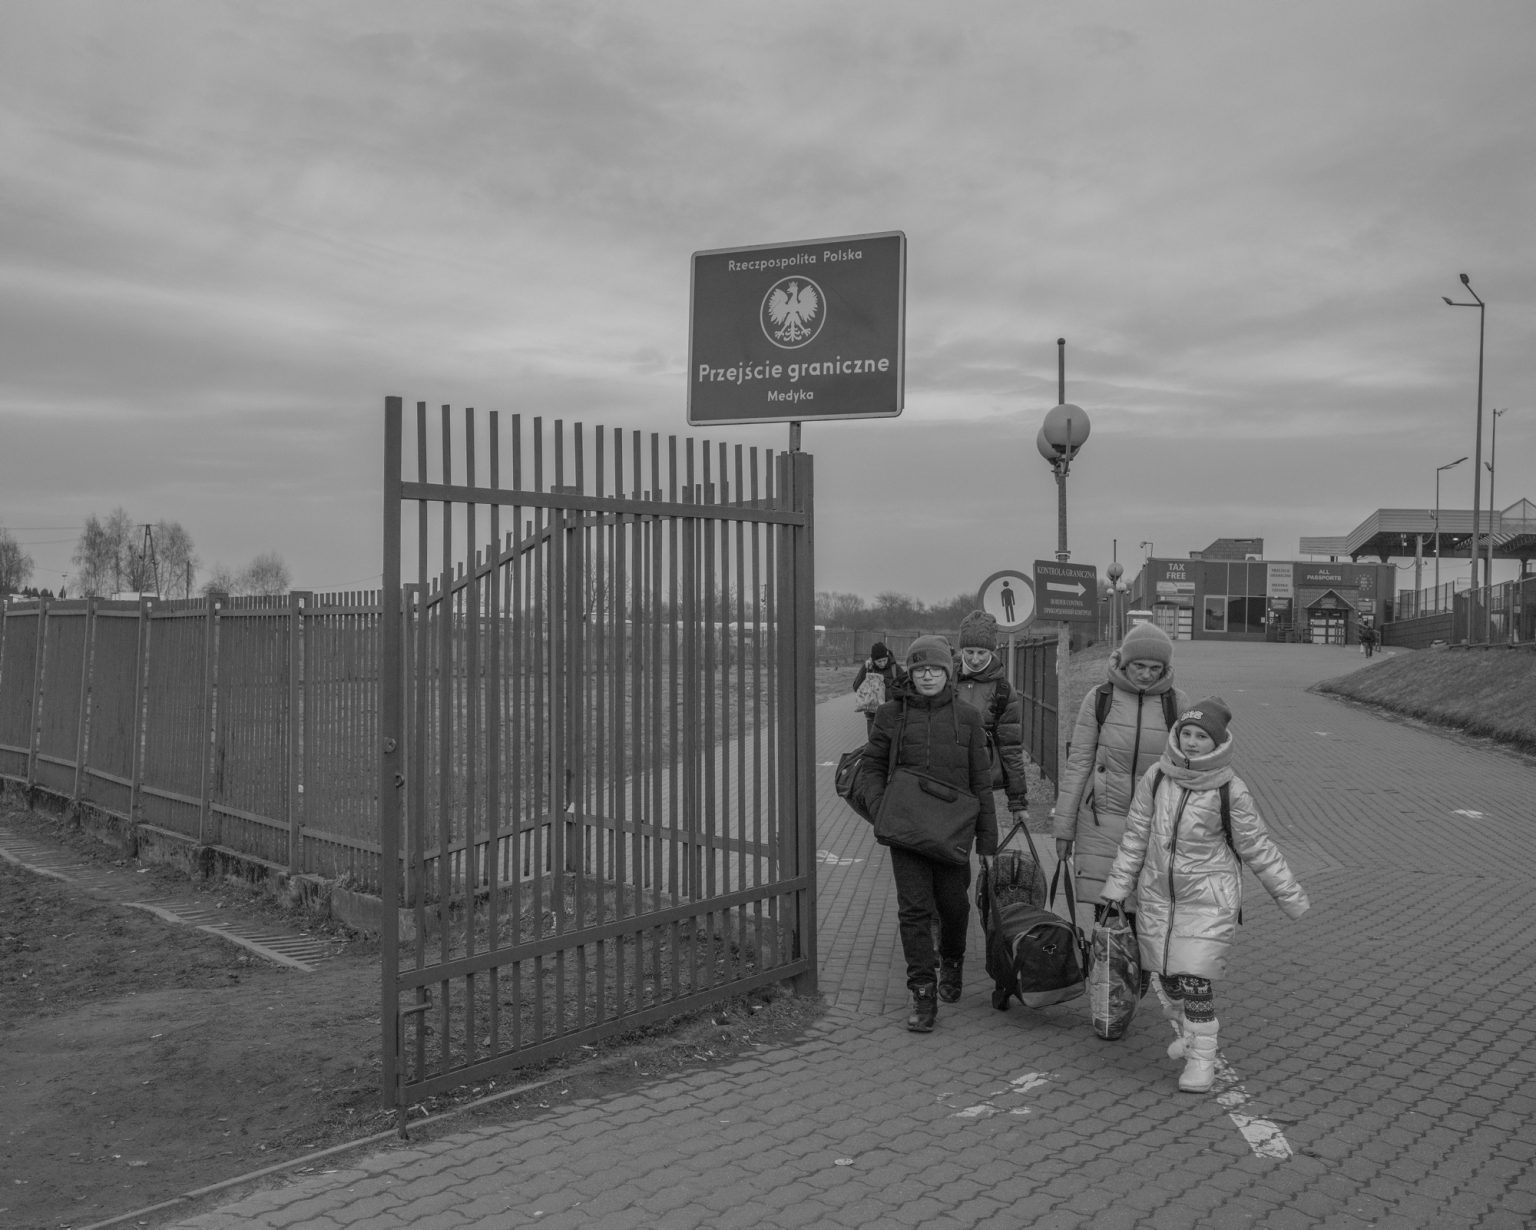 Ukrainian refugees at the Medyka border between Poland and Ukraine. More than 600,000 Ukrainians fleeing the conflict have already crossed this border making Poland the country with the largest number of refugees with one million people welcomed. Medyka, Poland. March 2022.                                              As Russia invades Ukraine, thousands of Ukrainians are fleeing the country to find shelter in bordering countries. 
---------
Con l'invasione russa ai danni dell'Ucraina, migliaia di ucraini sono in fuga dalla nazione d'origine per cercare rifugio nelle nazioni confinanti.